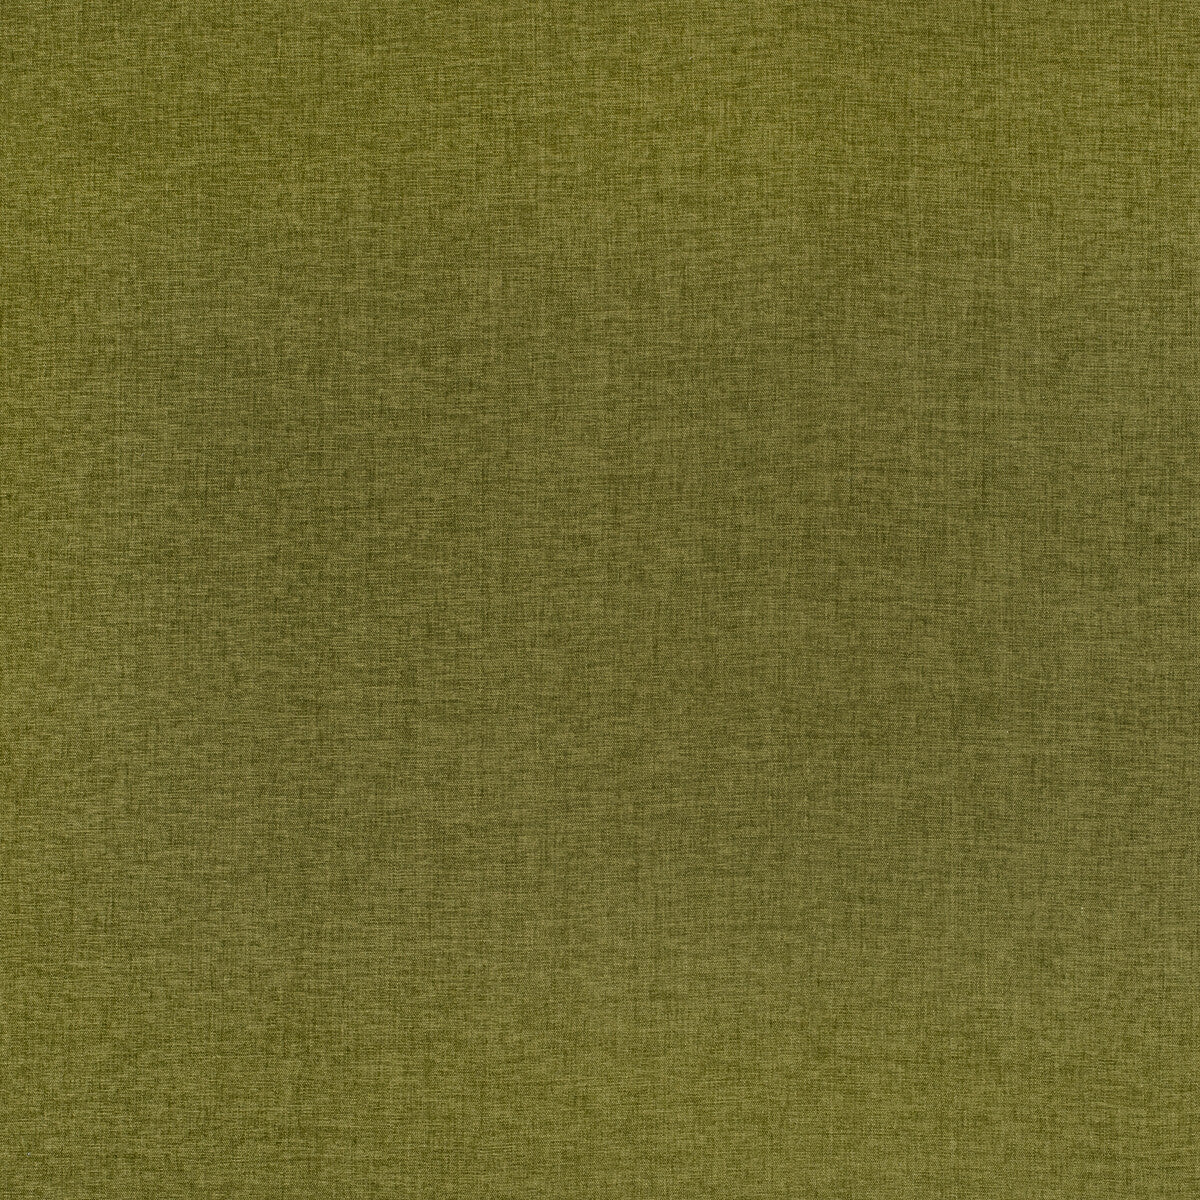 Kravet Smart fabric in 36095-130 color - pattern 36095.130.0 - by Kravet Smart in the Eco-Friendly Chenille collection